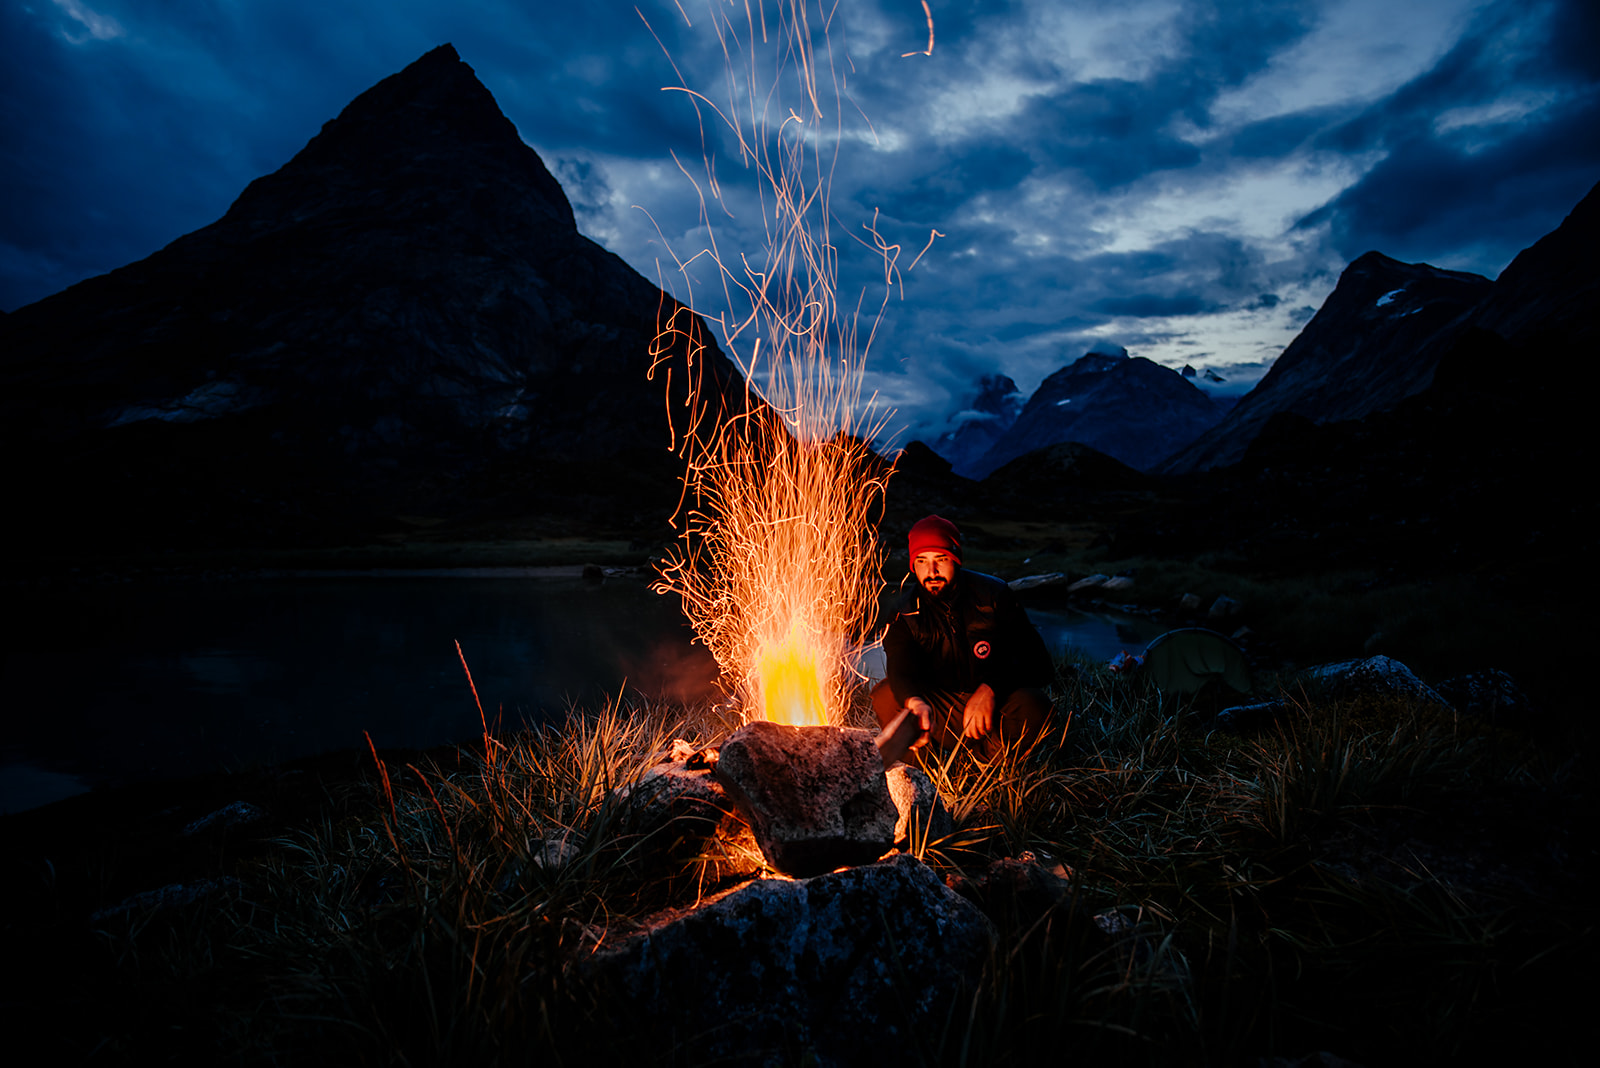 traveler setting up camp fire on Greenland